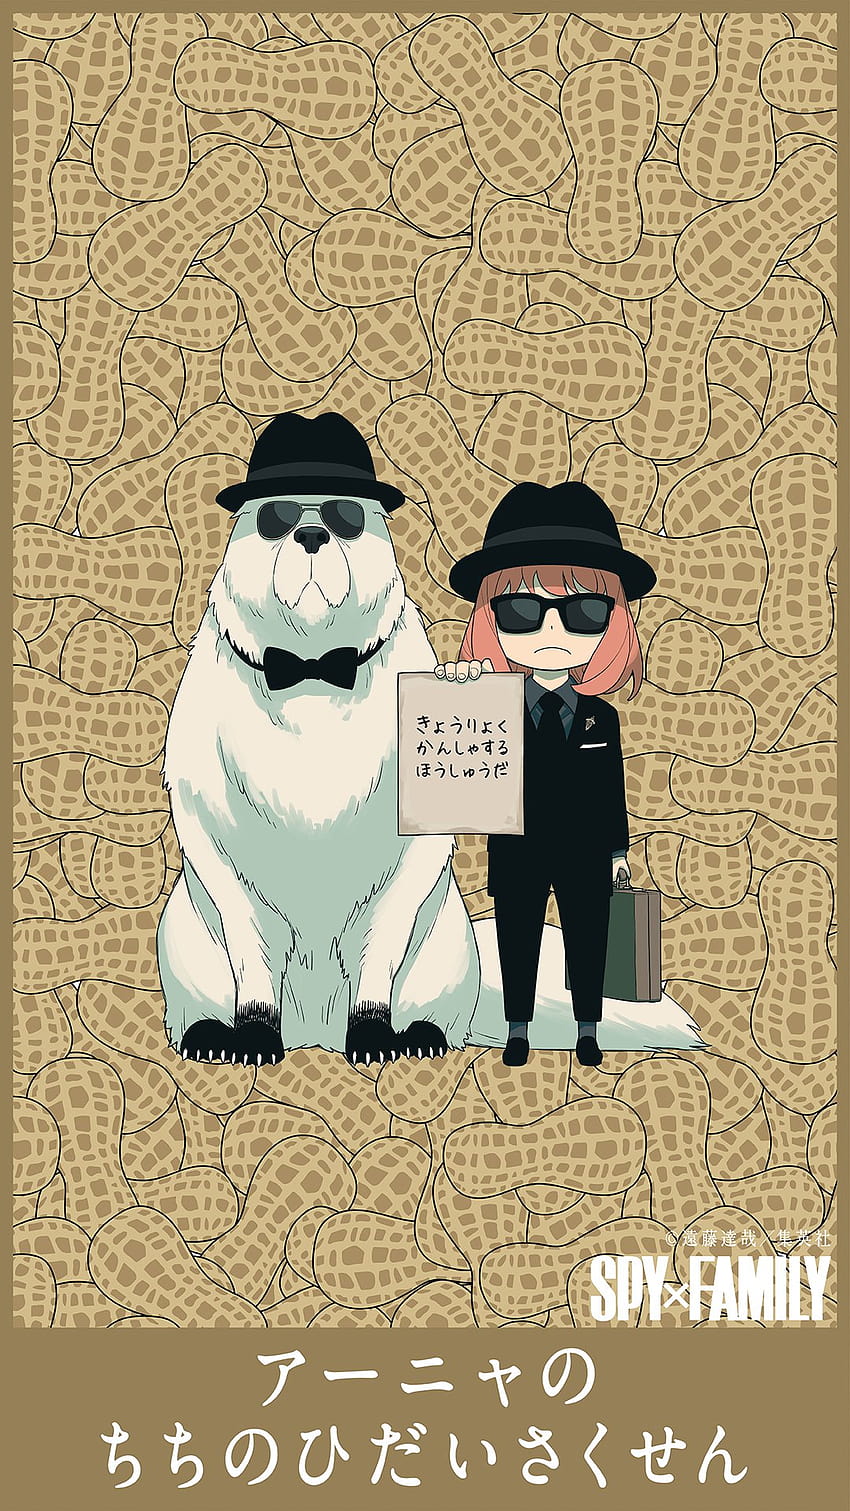 ▷ SPY x FAMILY is starting a special campaign on the way to Father's Day 〜 Anime Sweet, spy family mobile HD phone wallpaper